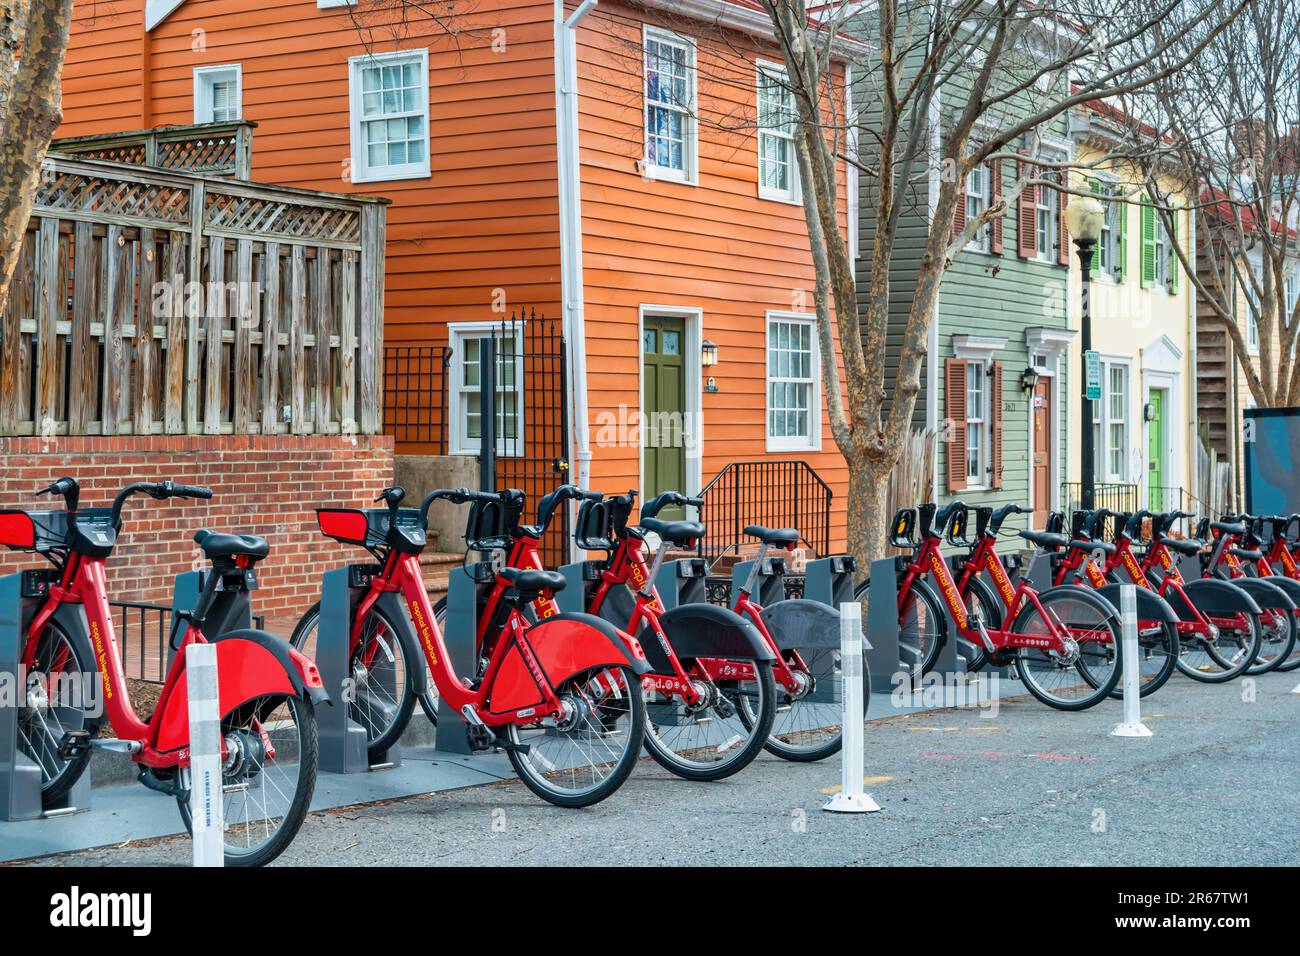 Shared bicycle stand in Georgetown district, Washington DC, USA. Stock Photo